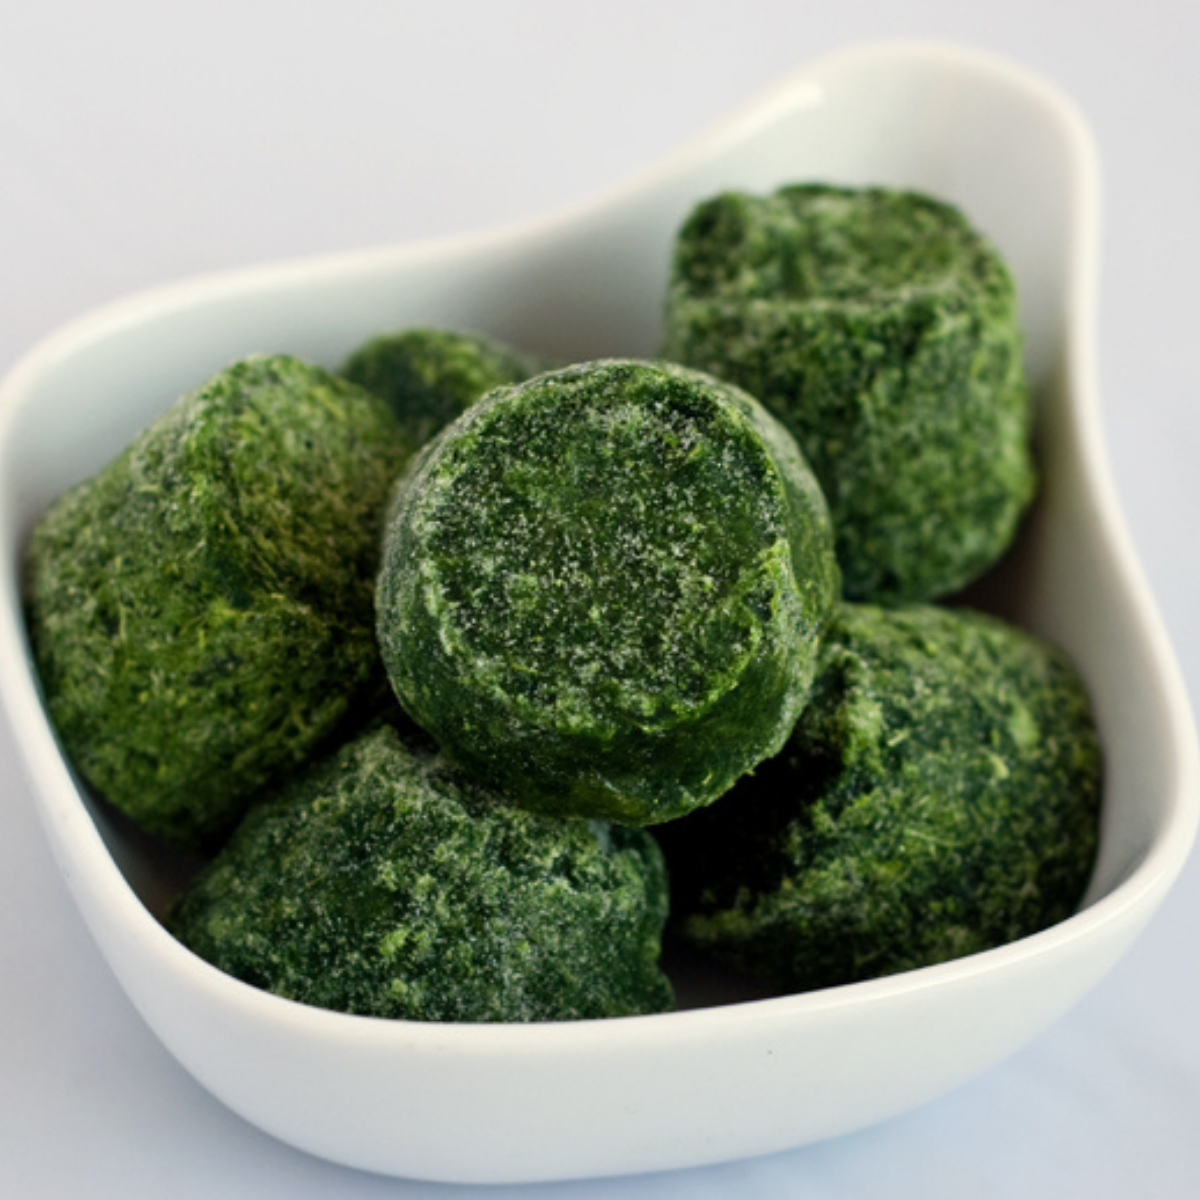 Spinach chopped portion